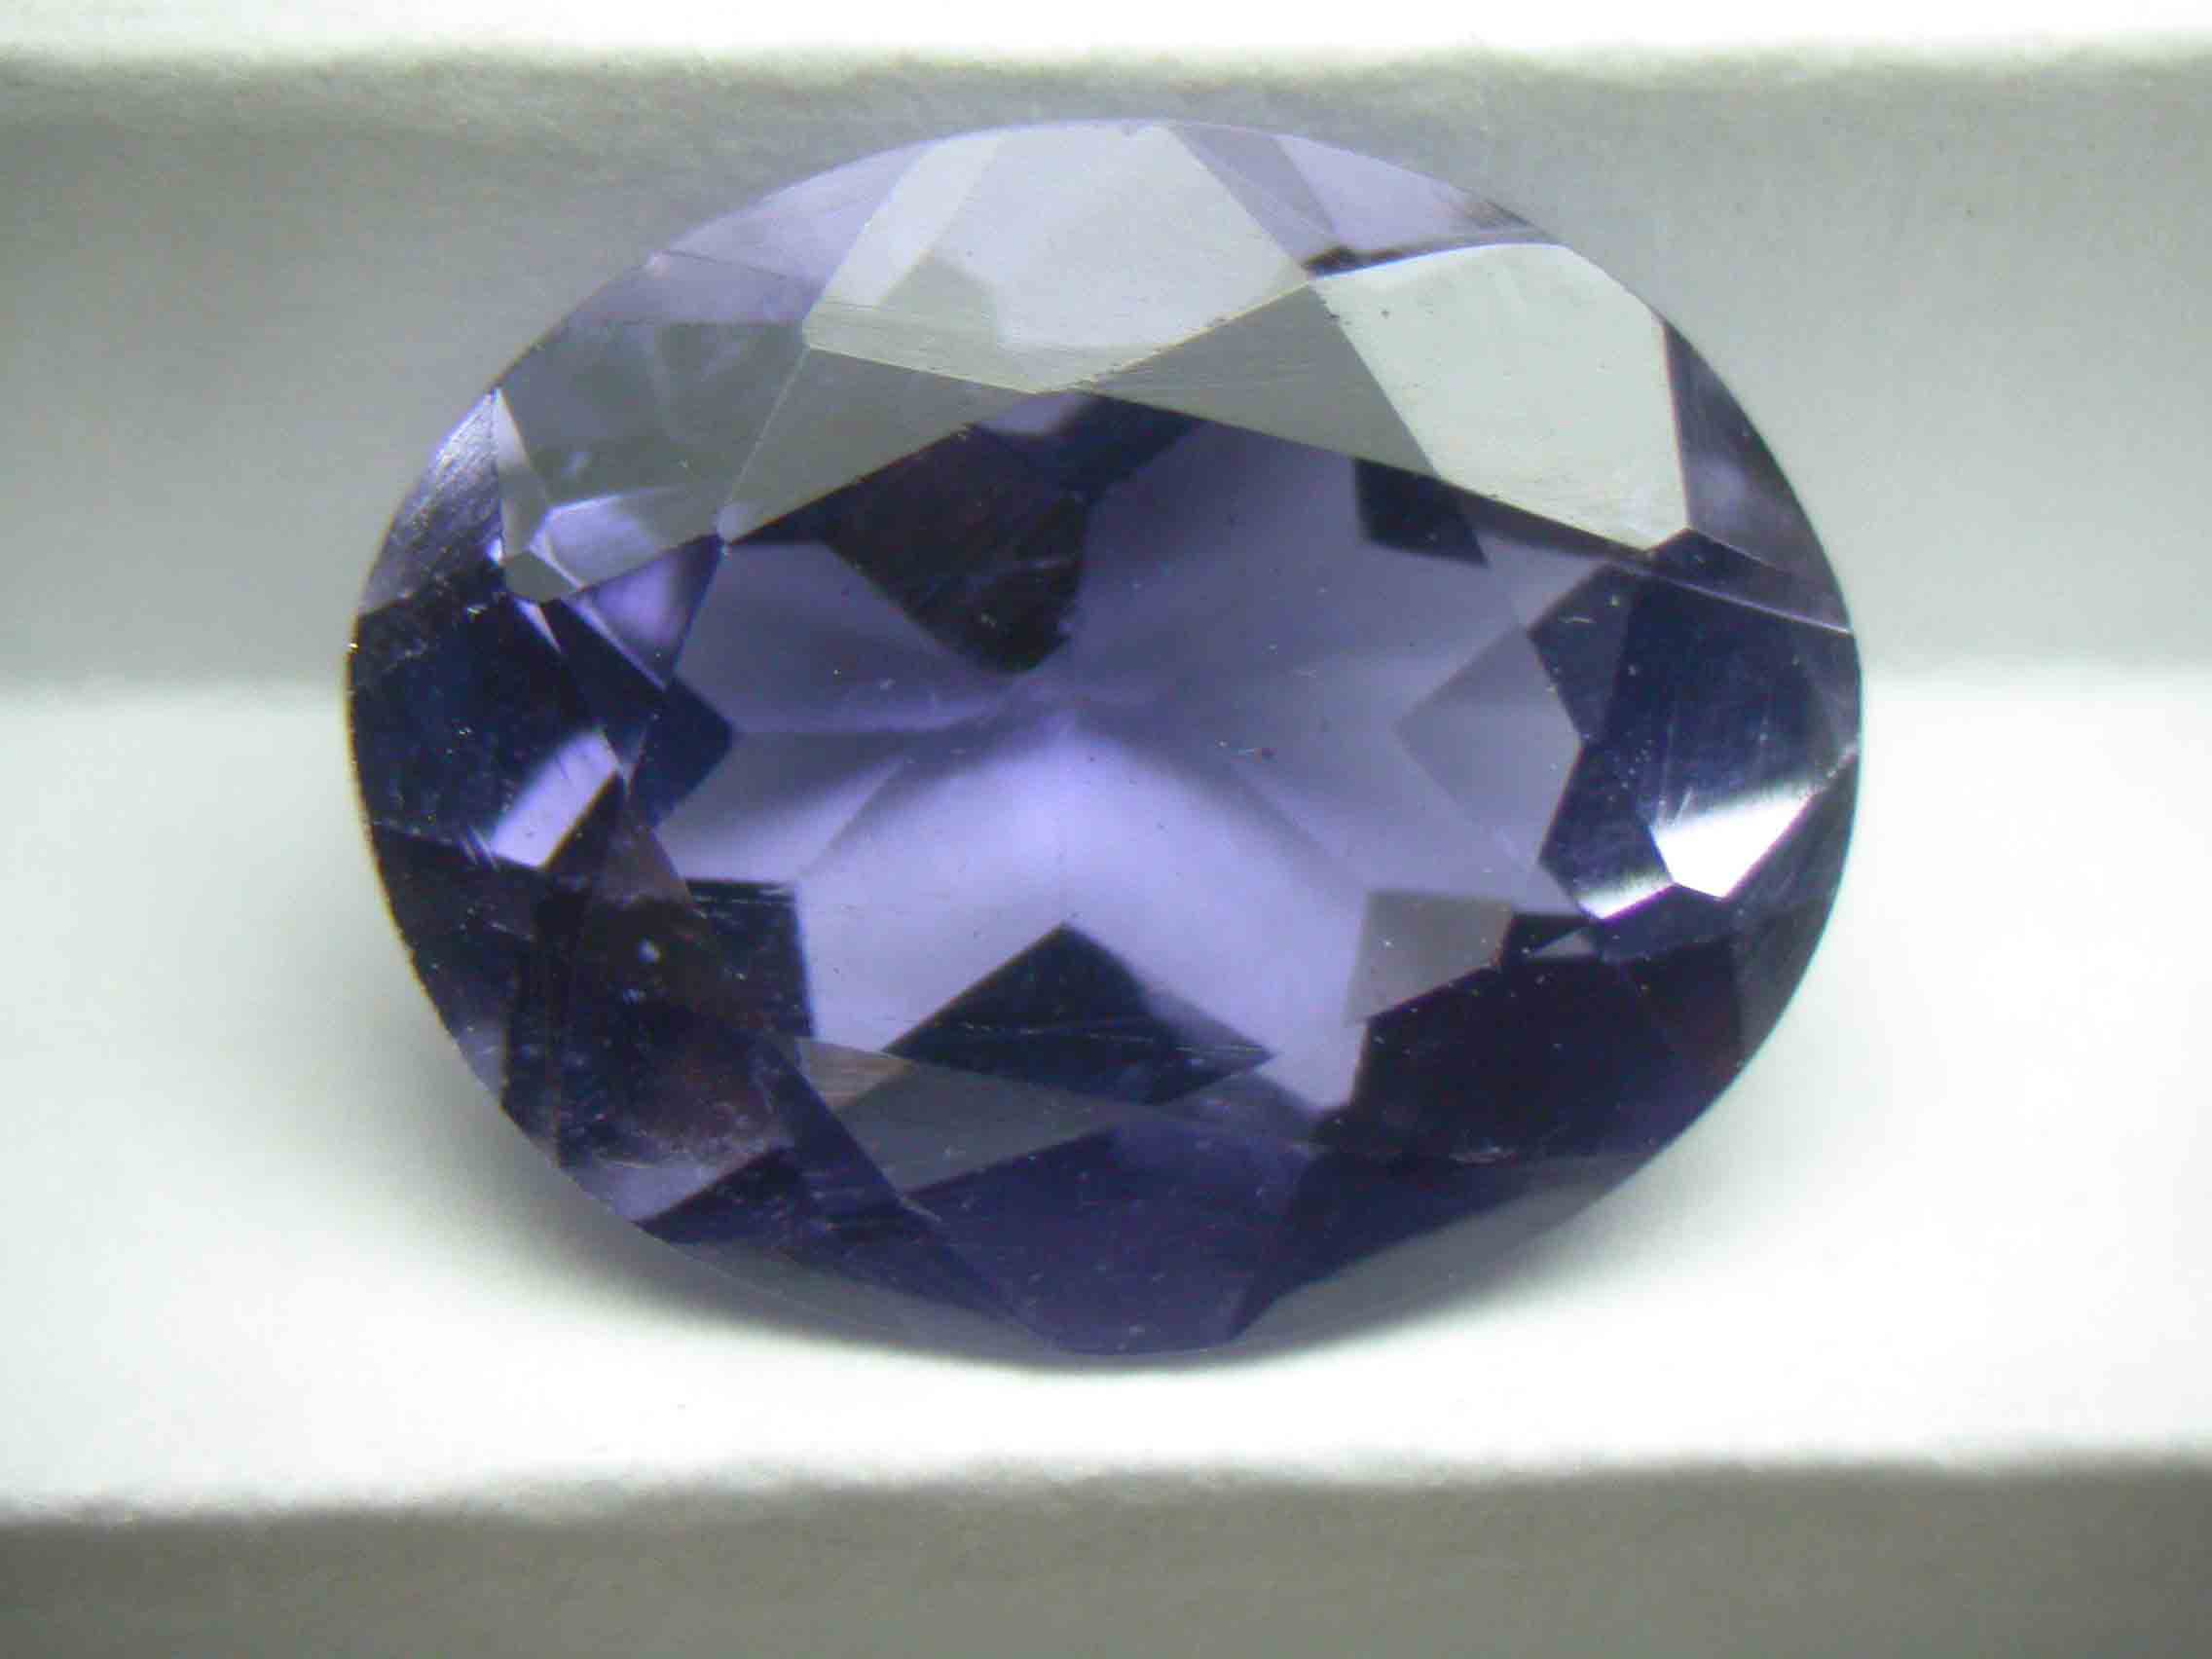 Common Mistakes: The Pitfalls Many New Gemmologists Encounter - - Iolite 6541 PD